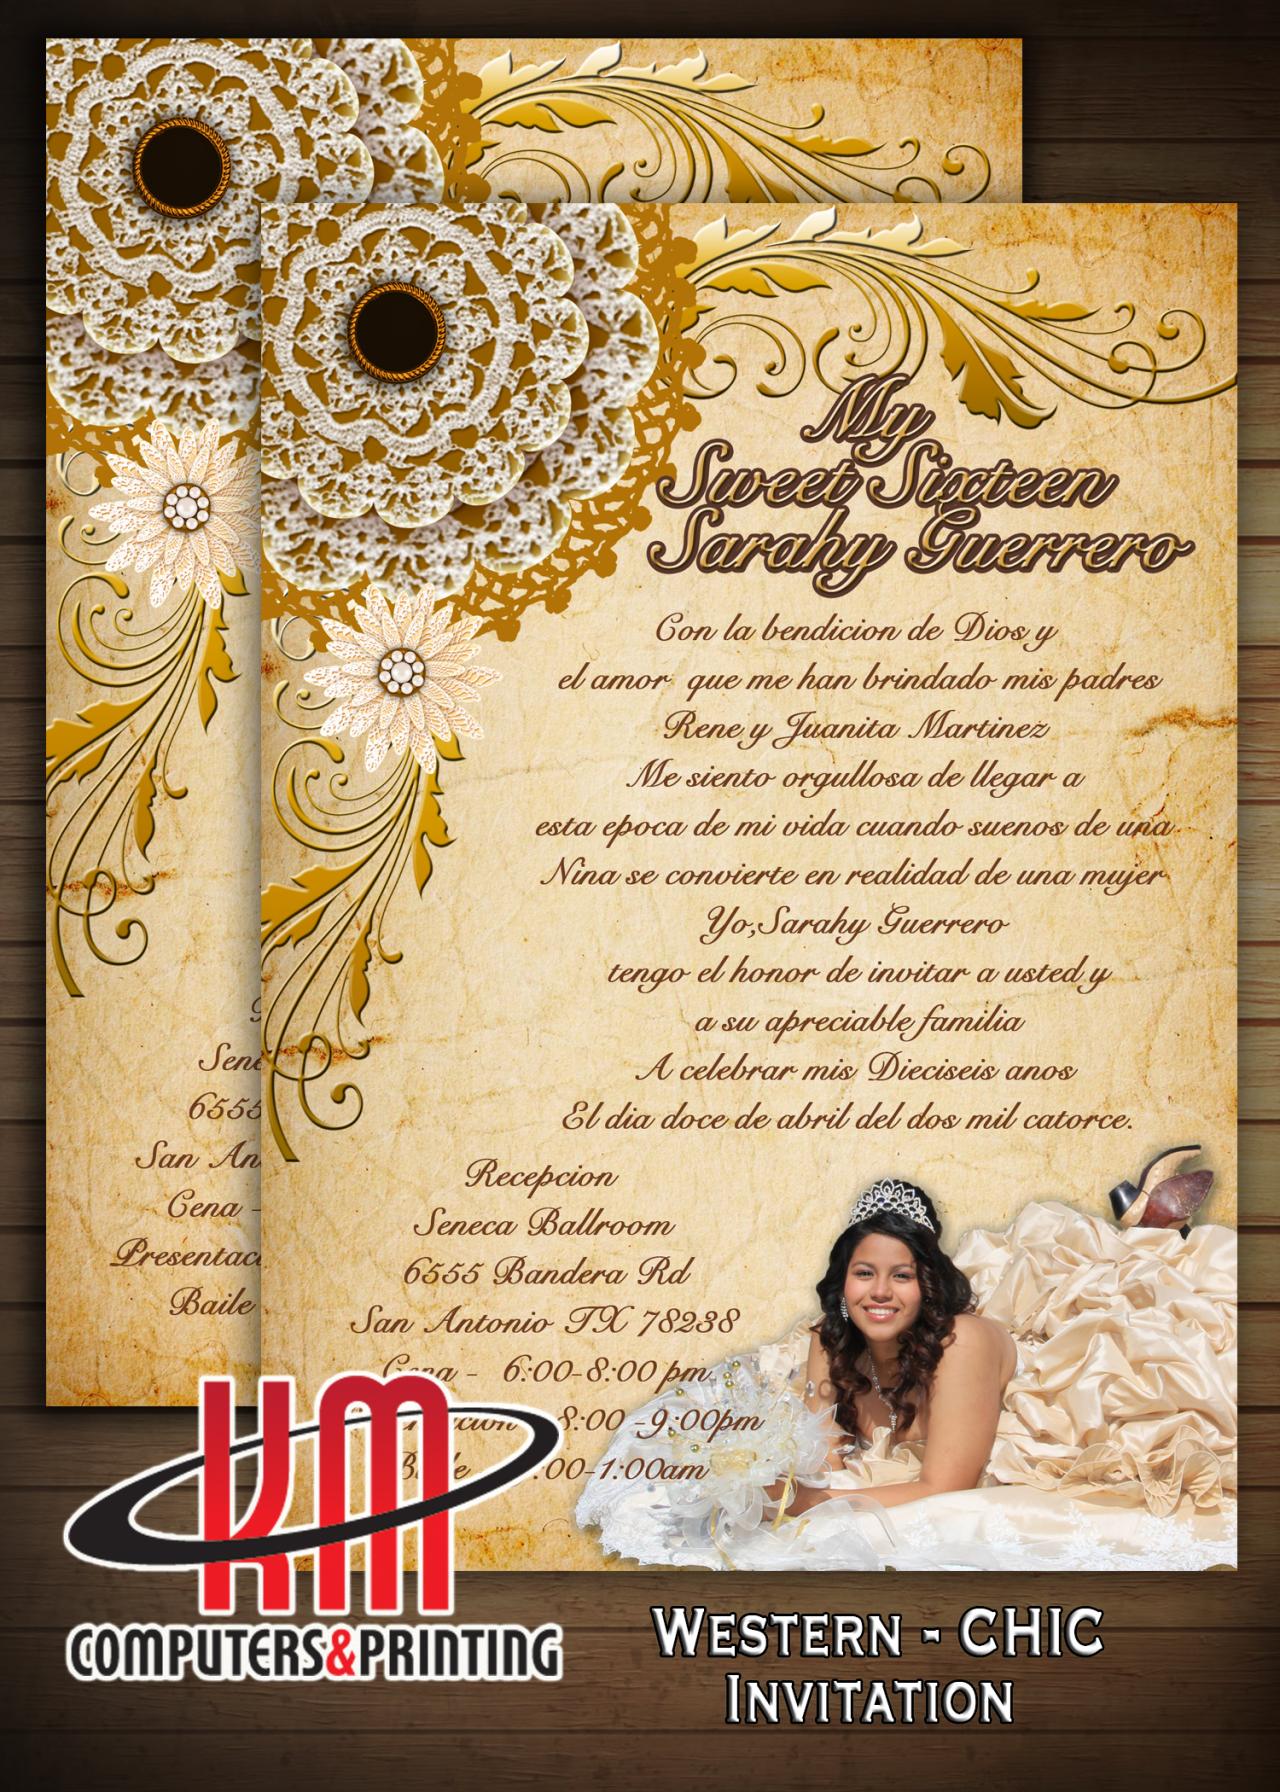 Western Chic Invitations For Sweet16 Or Quinceañera